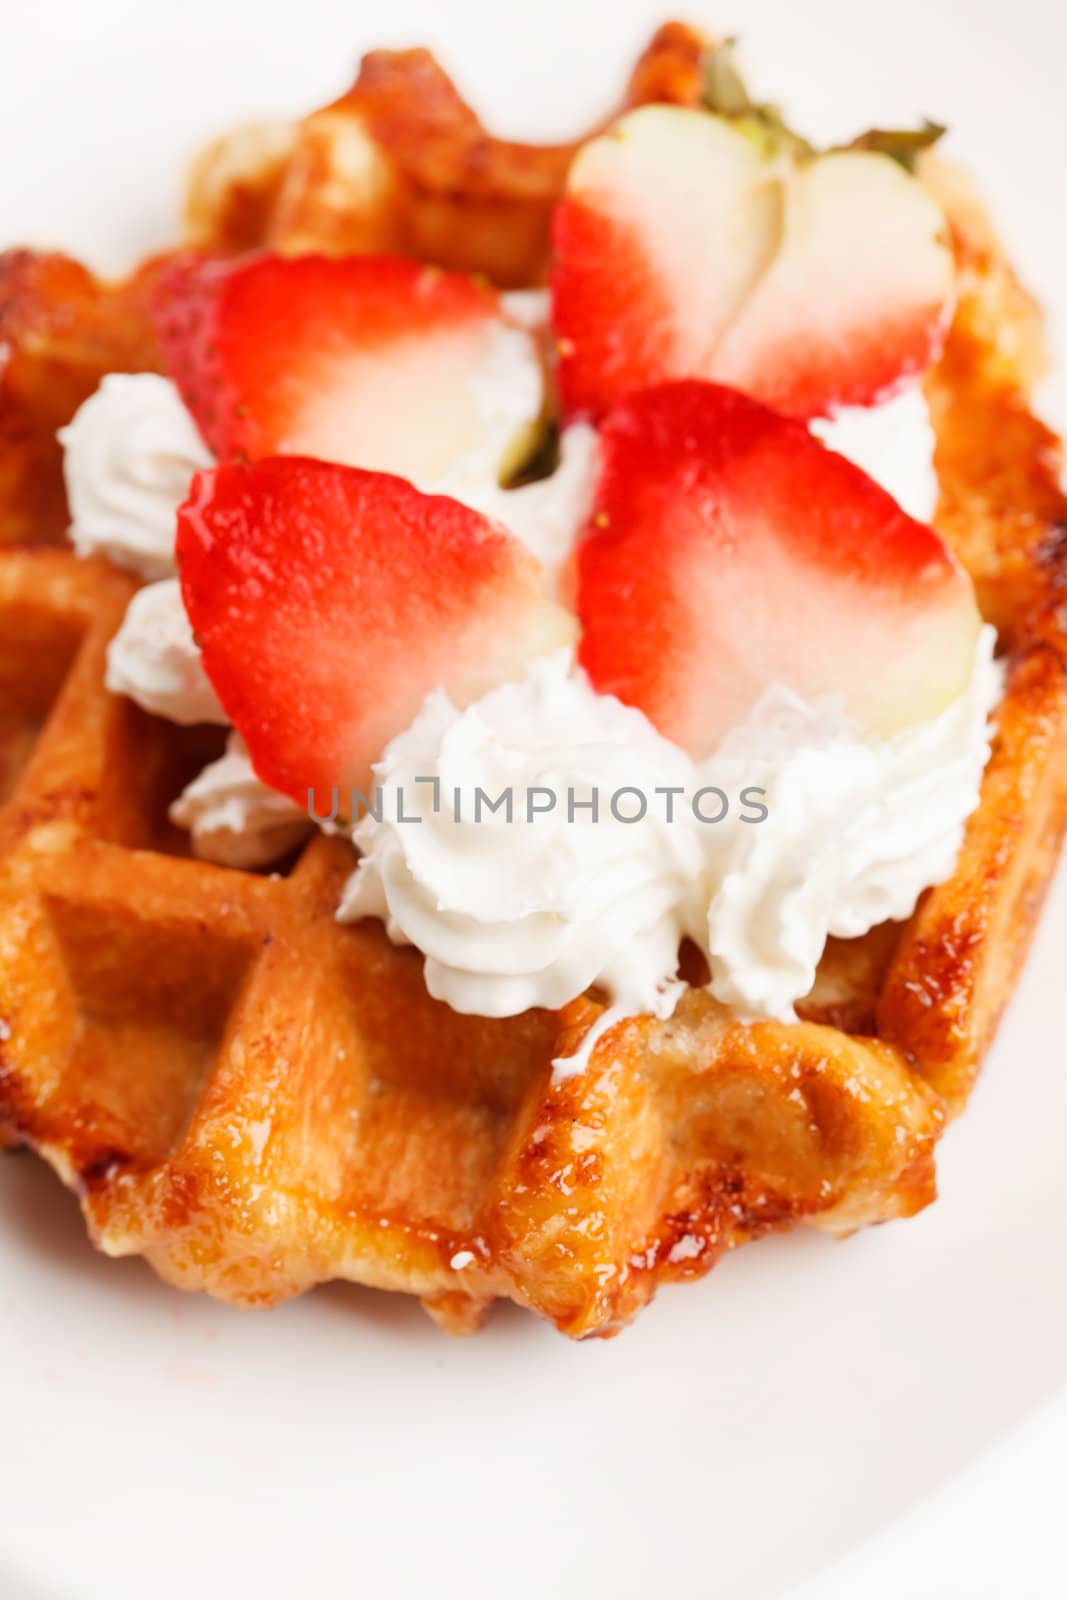 belgian waffles with fresh strawberries and whipped cream